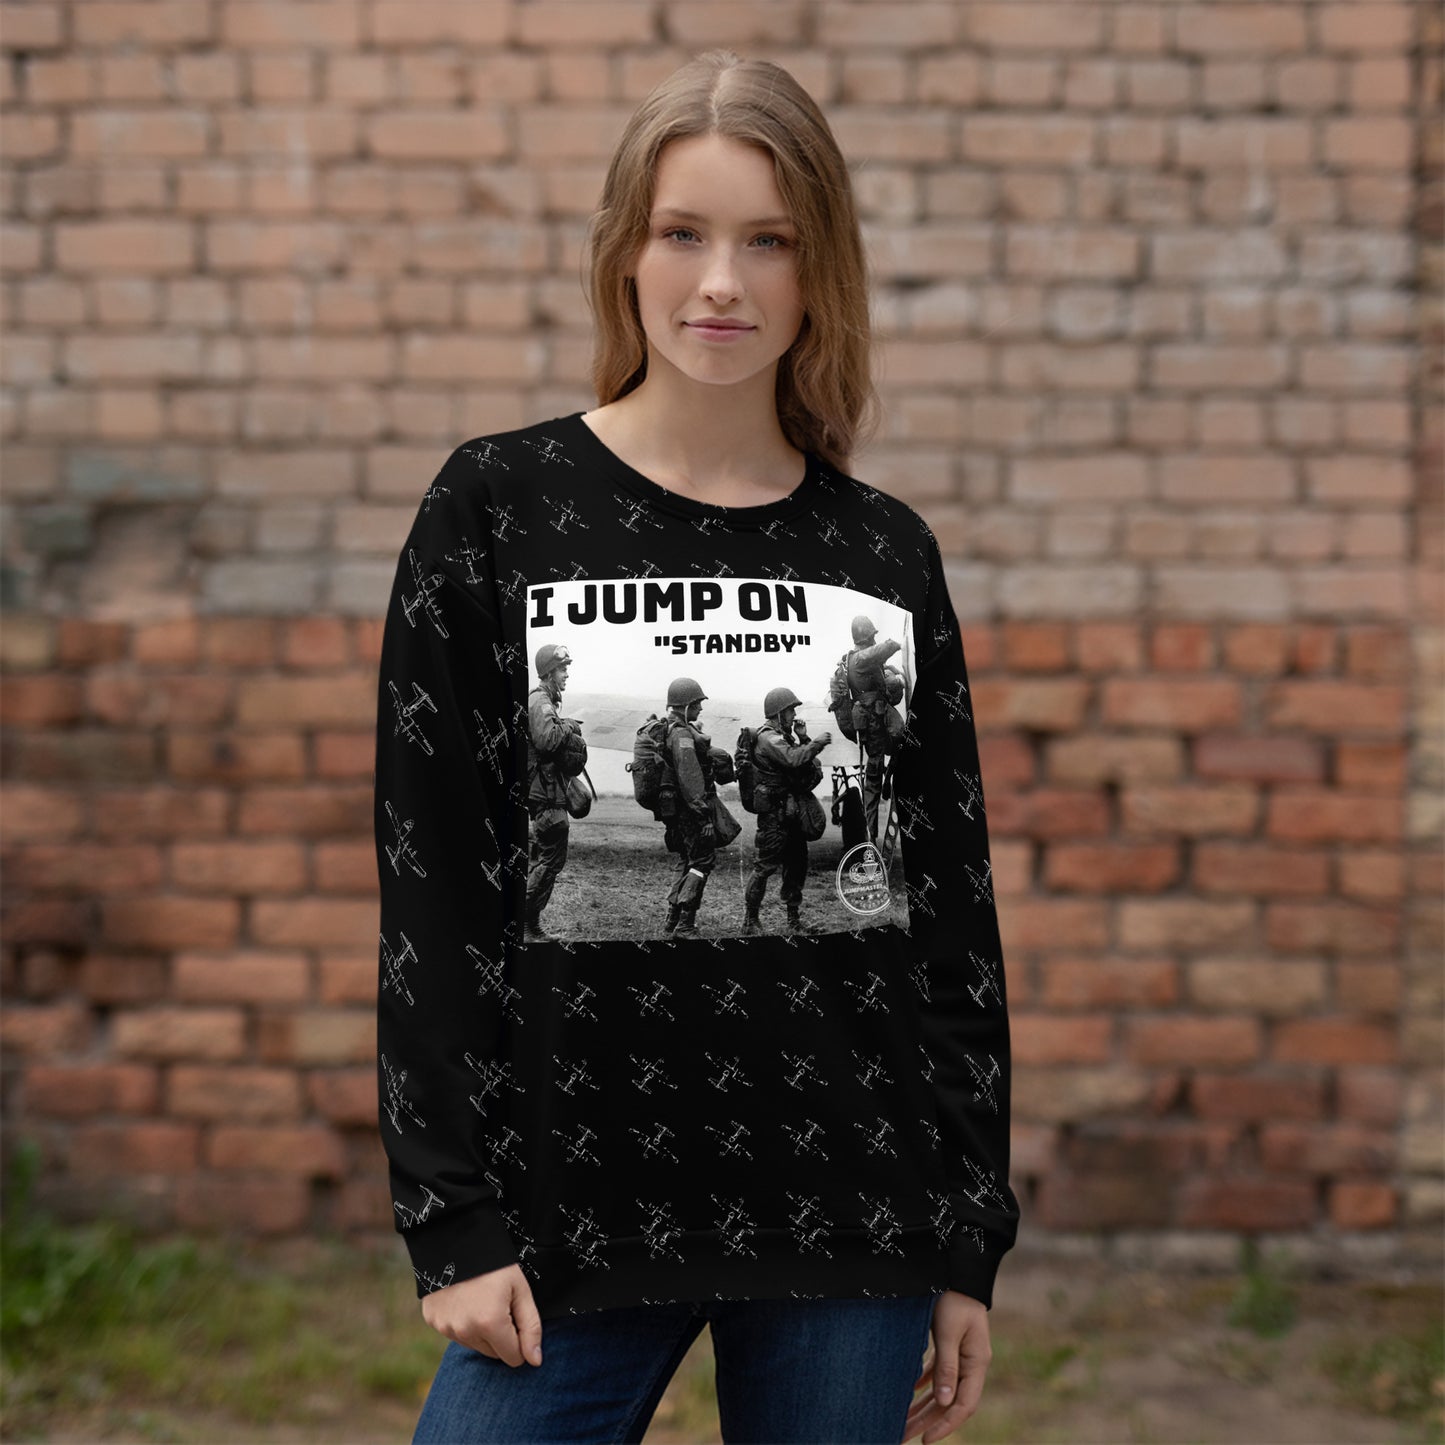 "I Jump on Stand-by" Sweater - Army Airborne